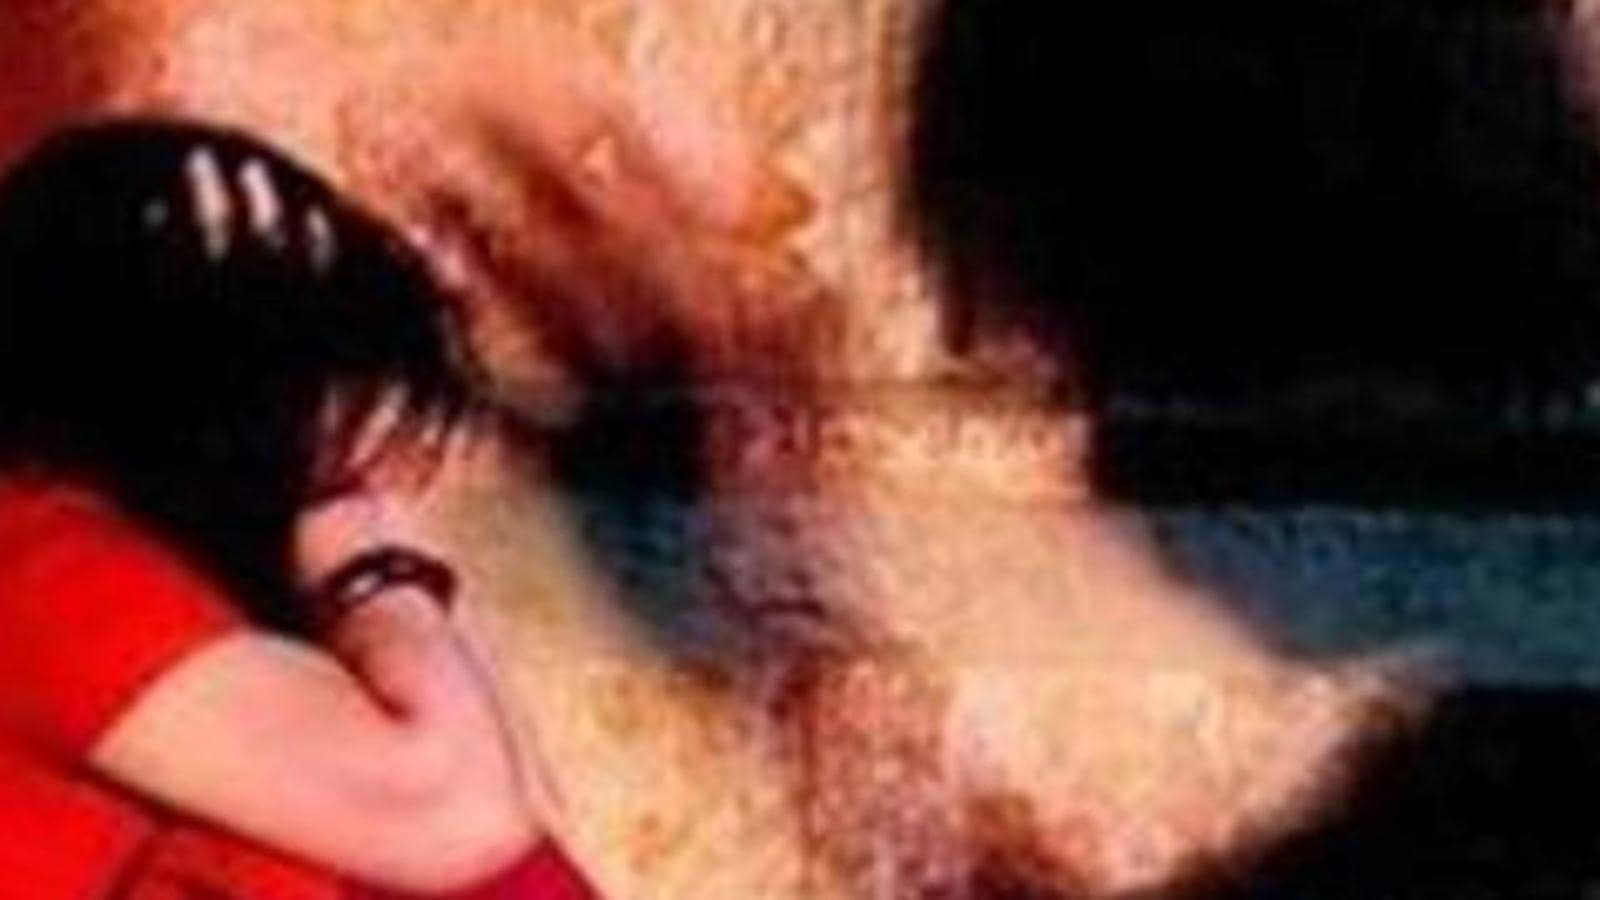 Pregnant Girl Delivery Raping Sex Porn Choda - 14-yr-old MP girl gang-raped for 8 months, killed her newborn, arrested:  Cops - Hindustan Times